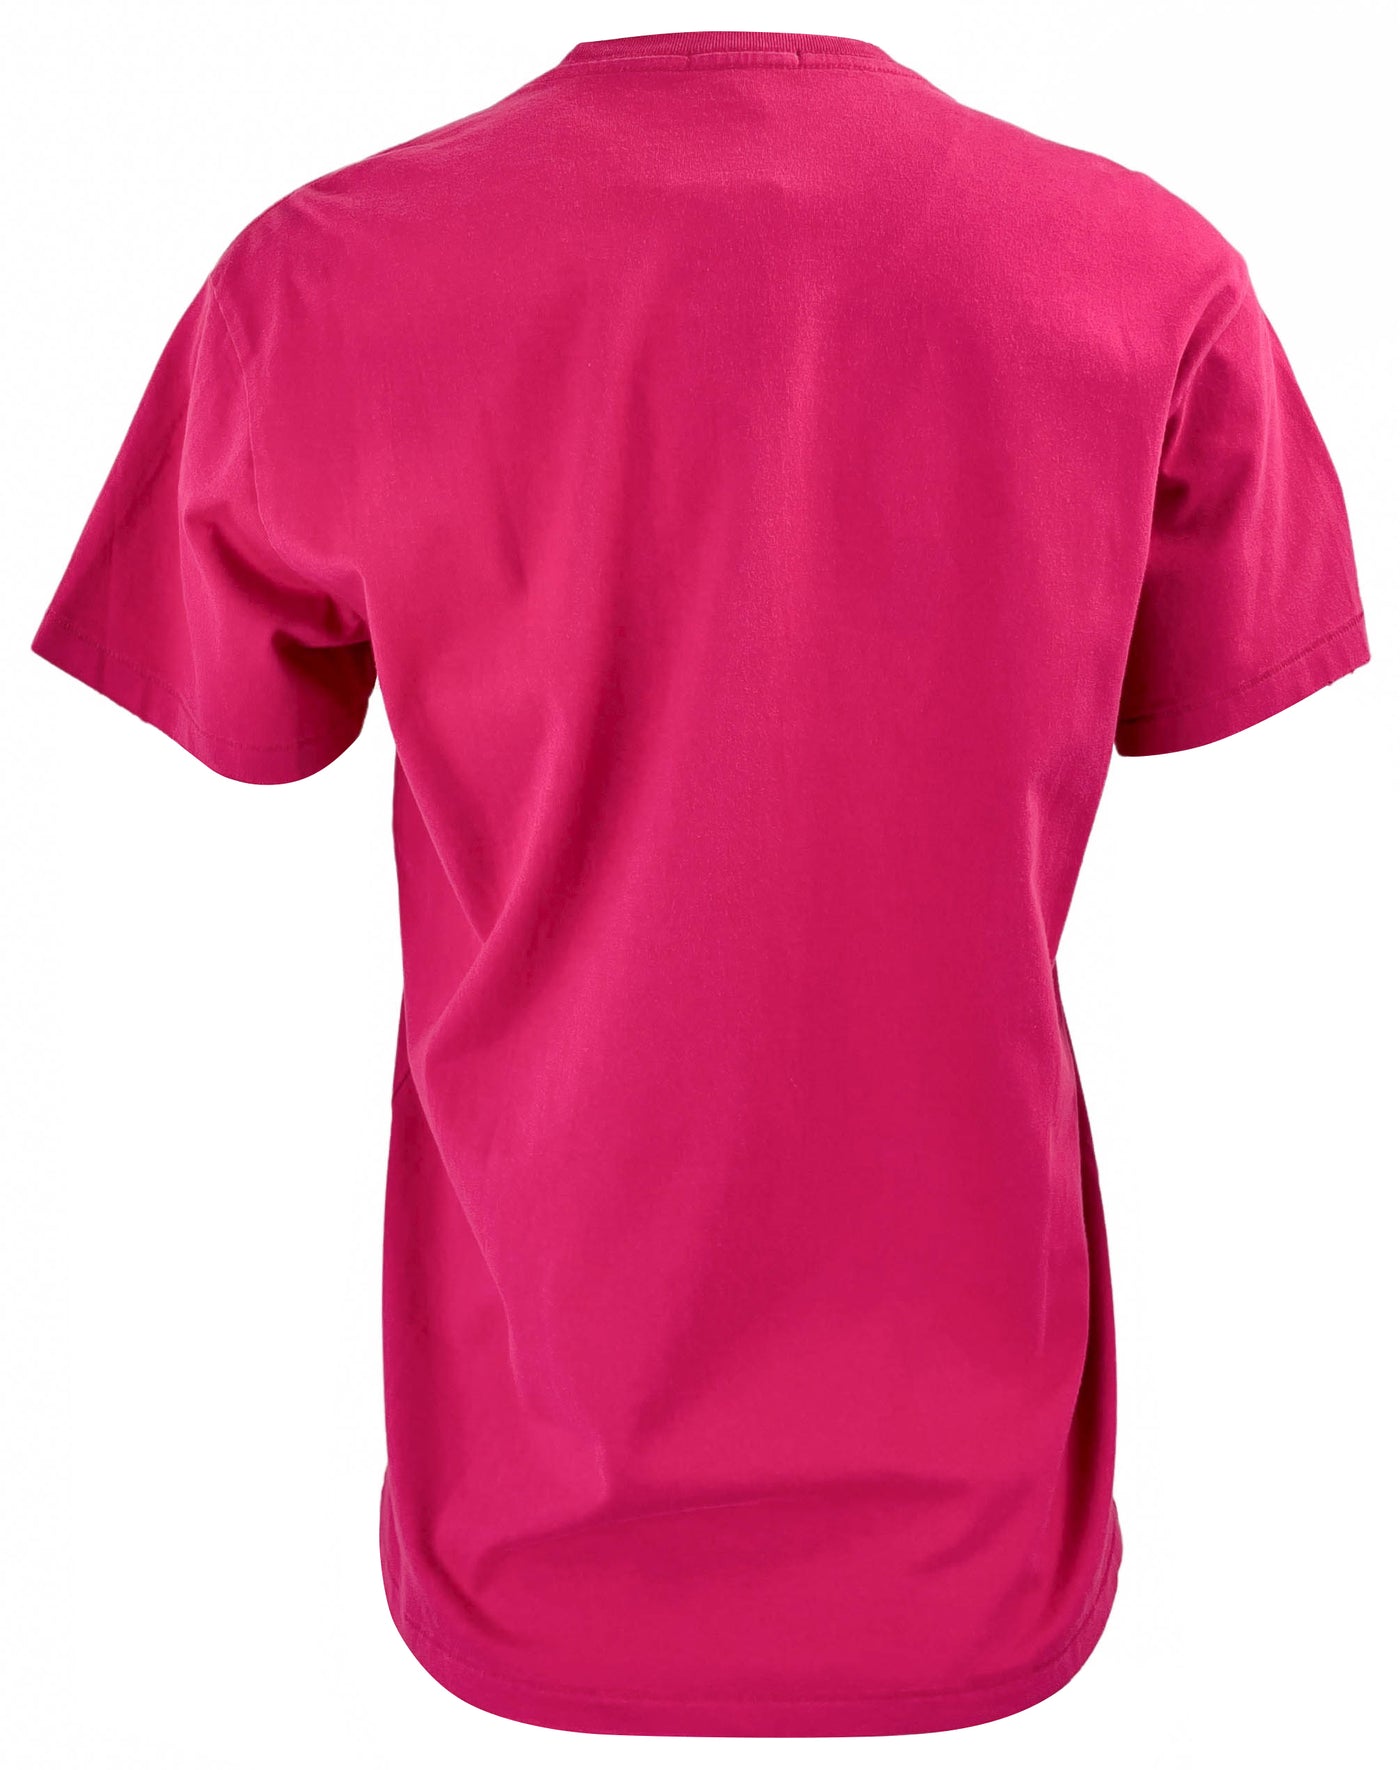 R13 New York Boy Tee in Bright Pink - Discounts on R13 at UAL